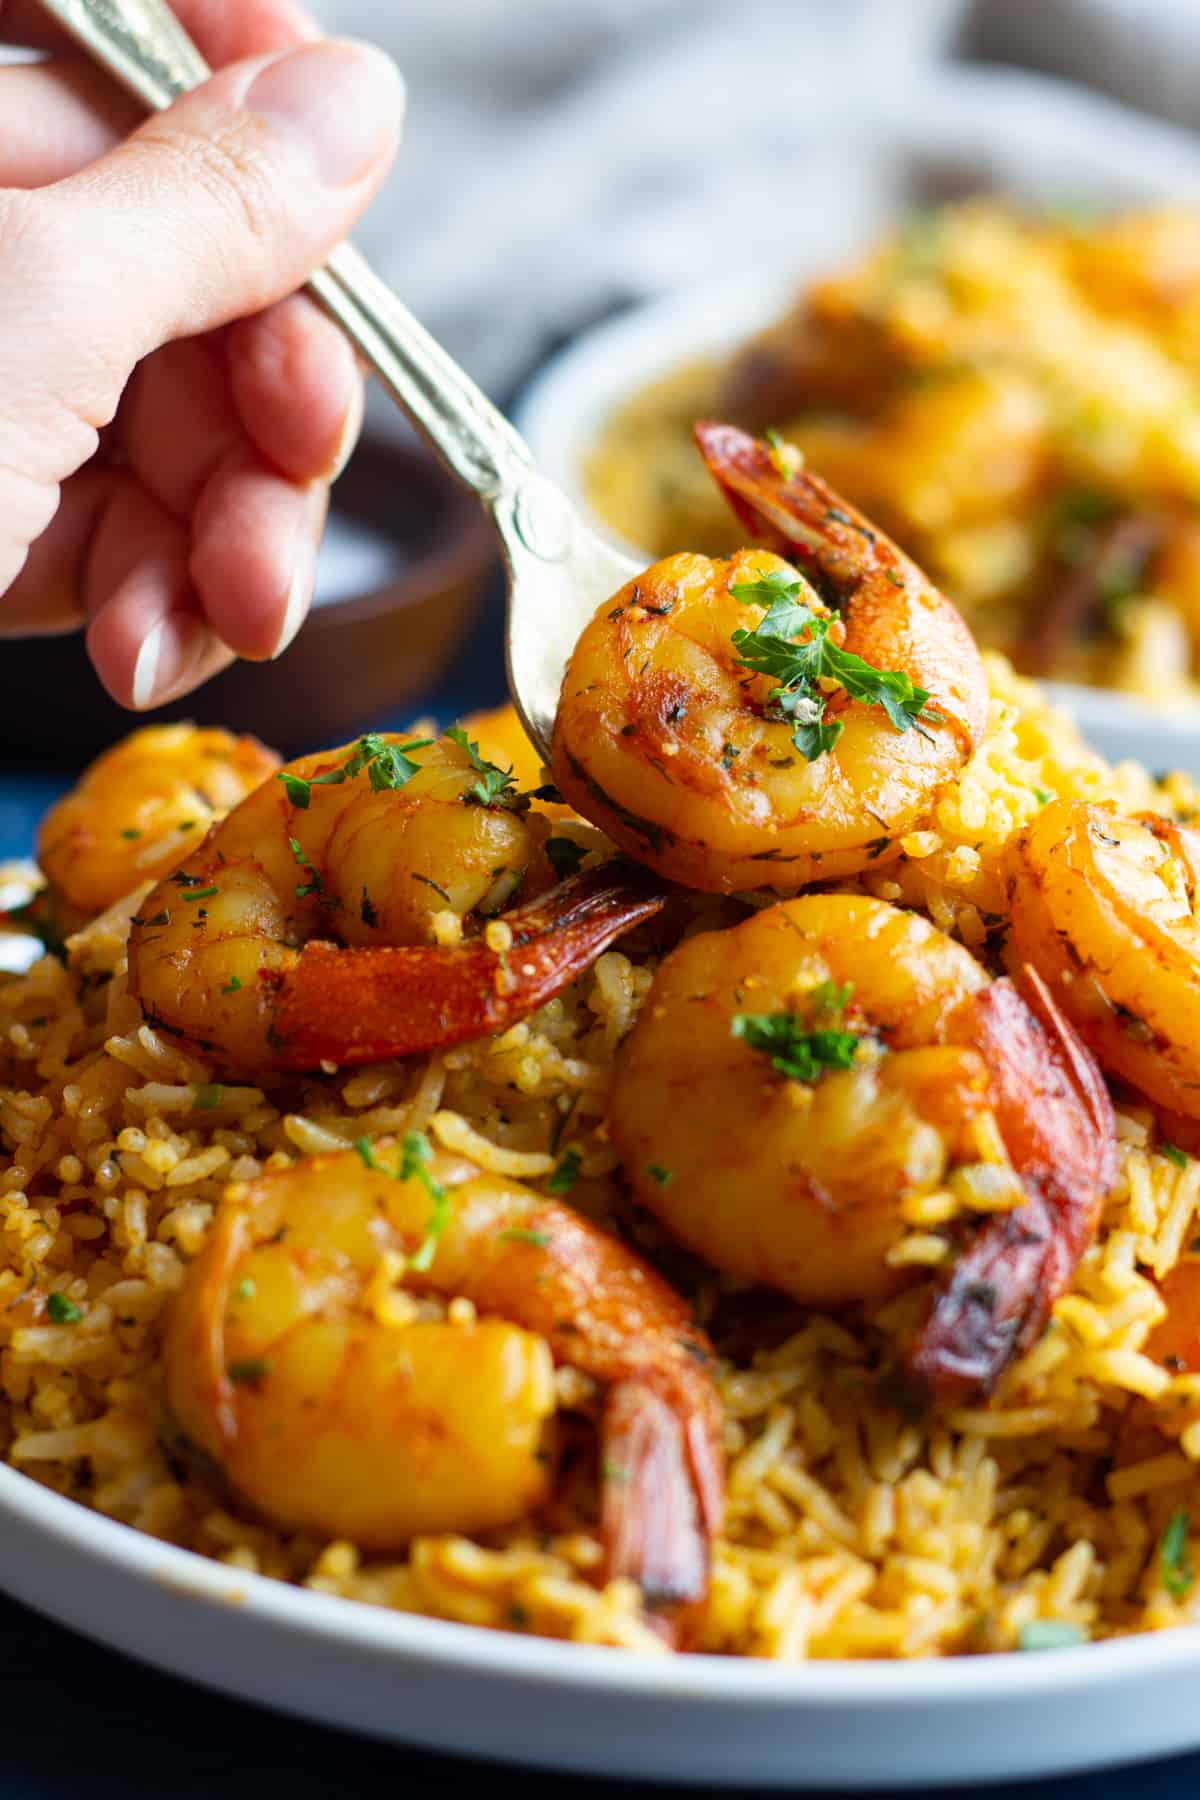 Cooked shrimp on spiced rice Persian style